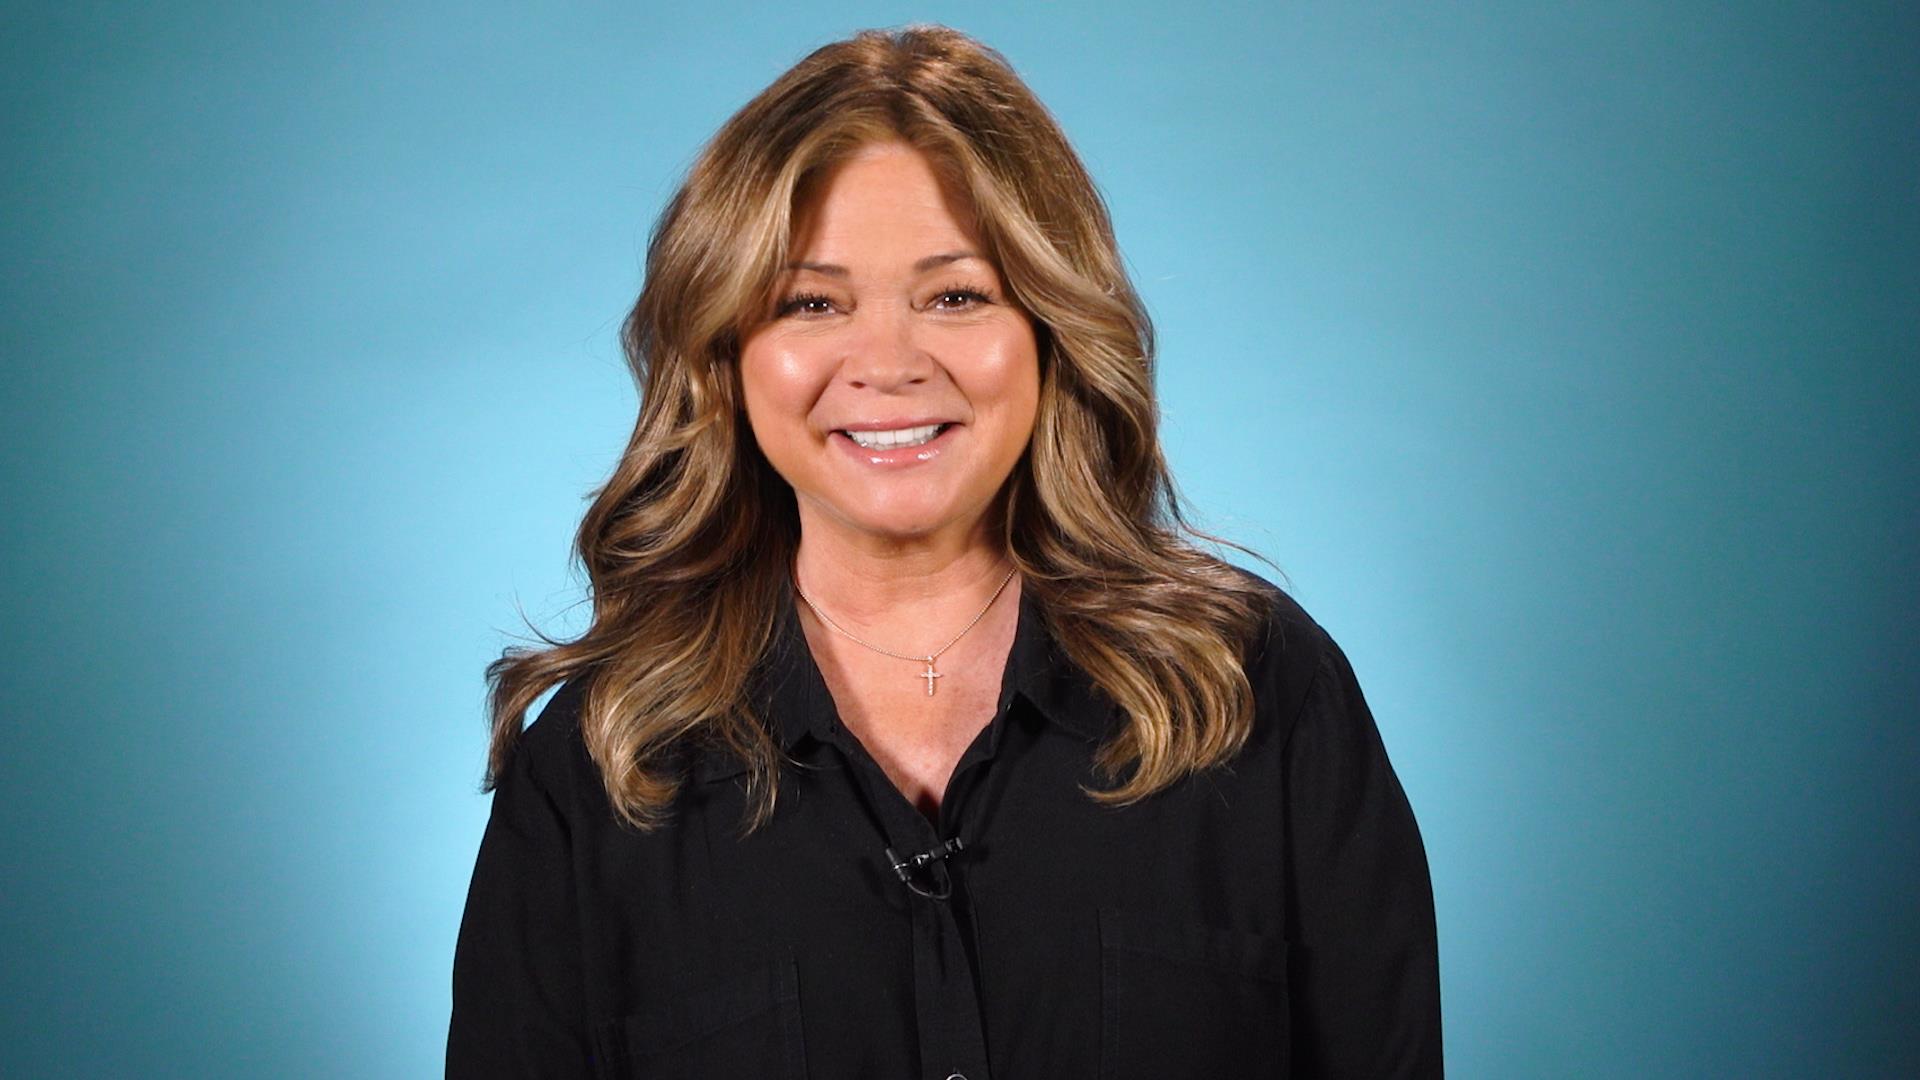 Valerie Bertinelli shares the one small thing that helps her stay positive